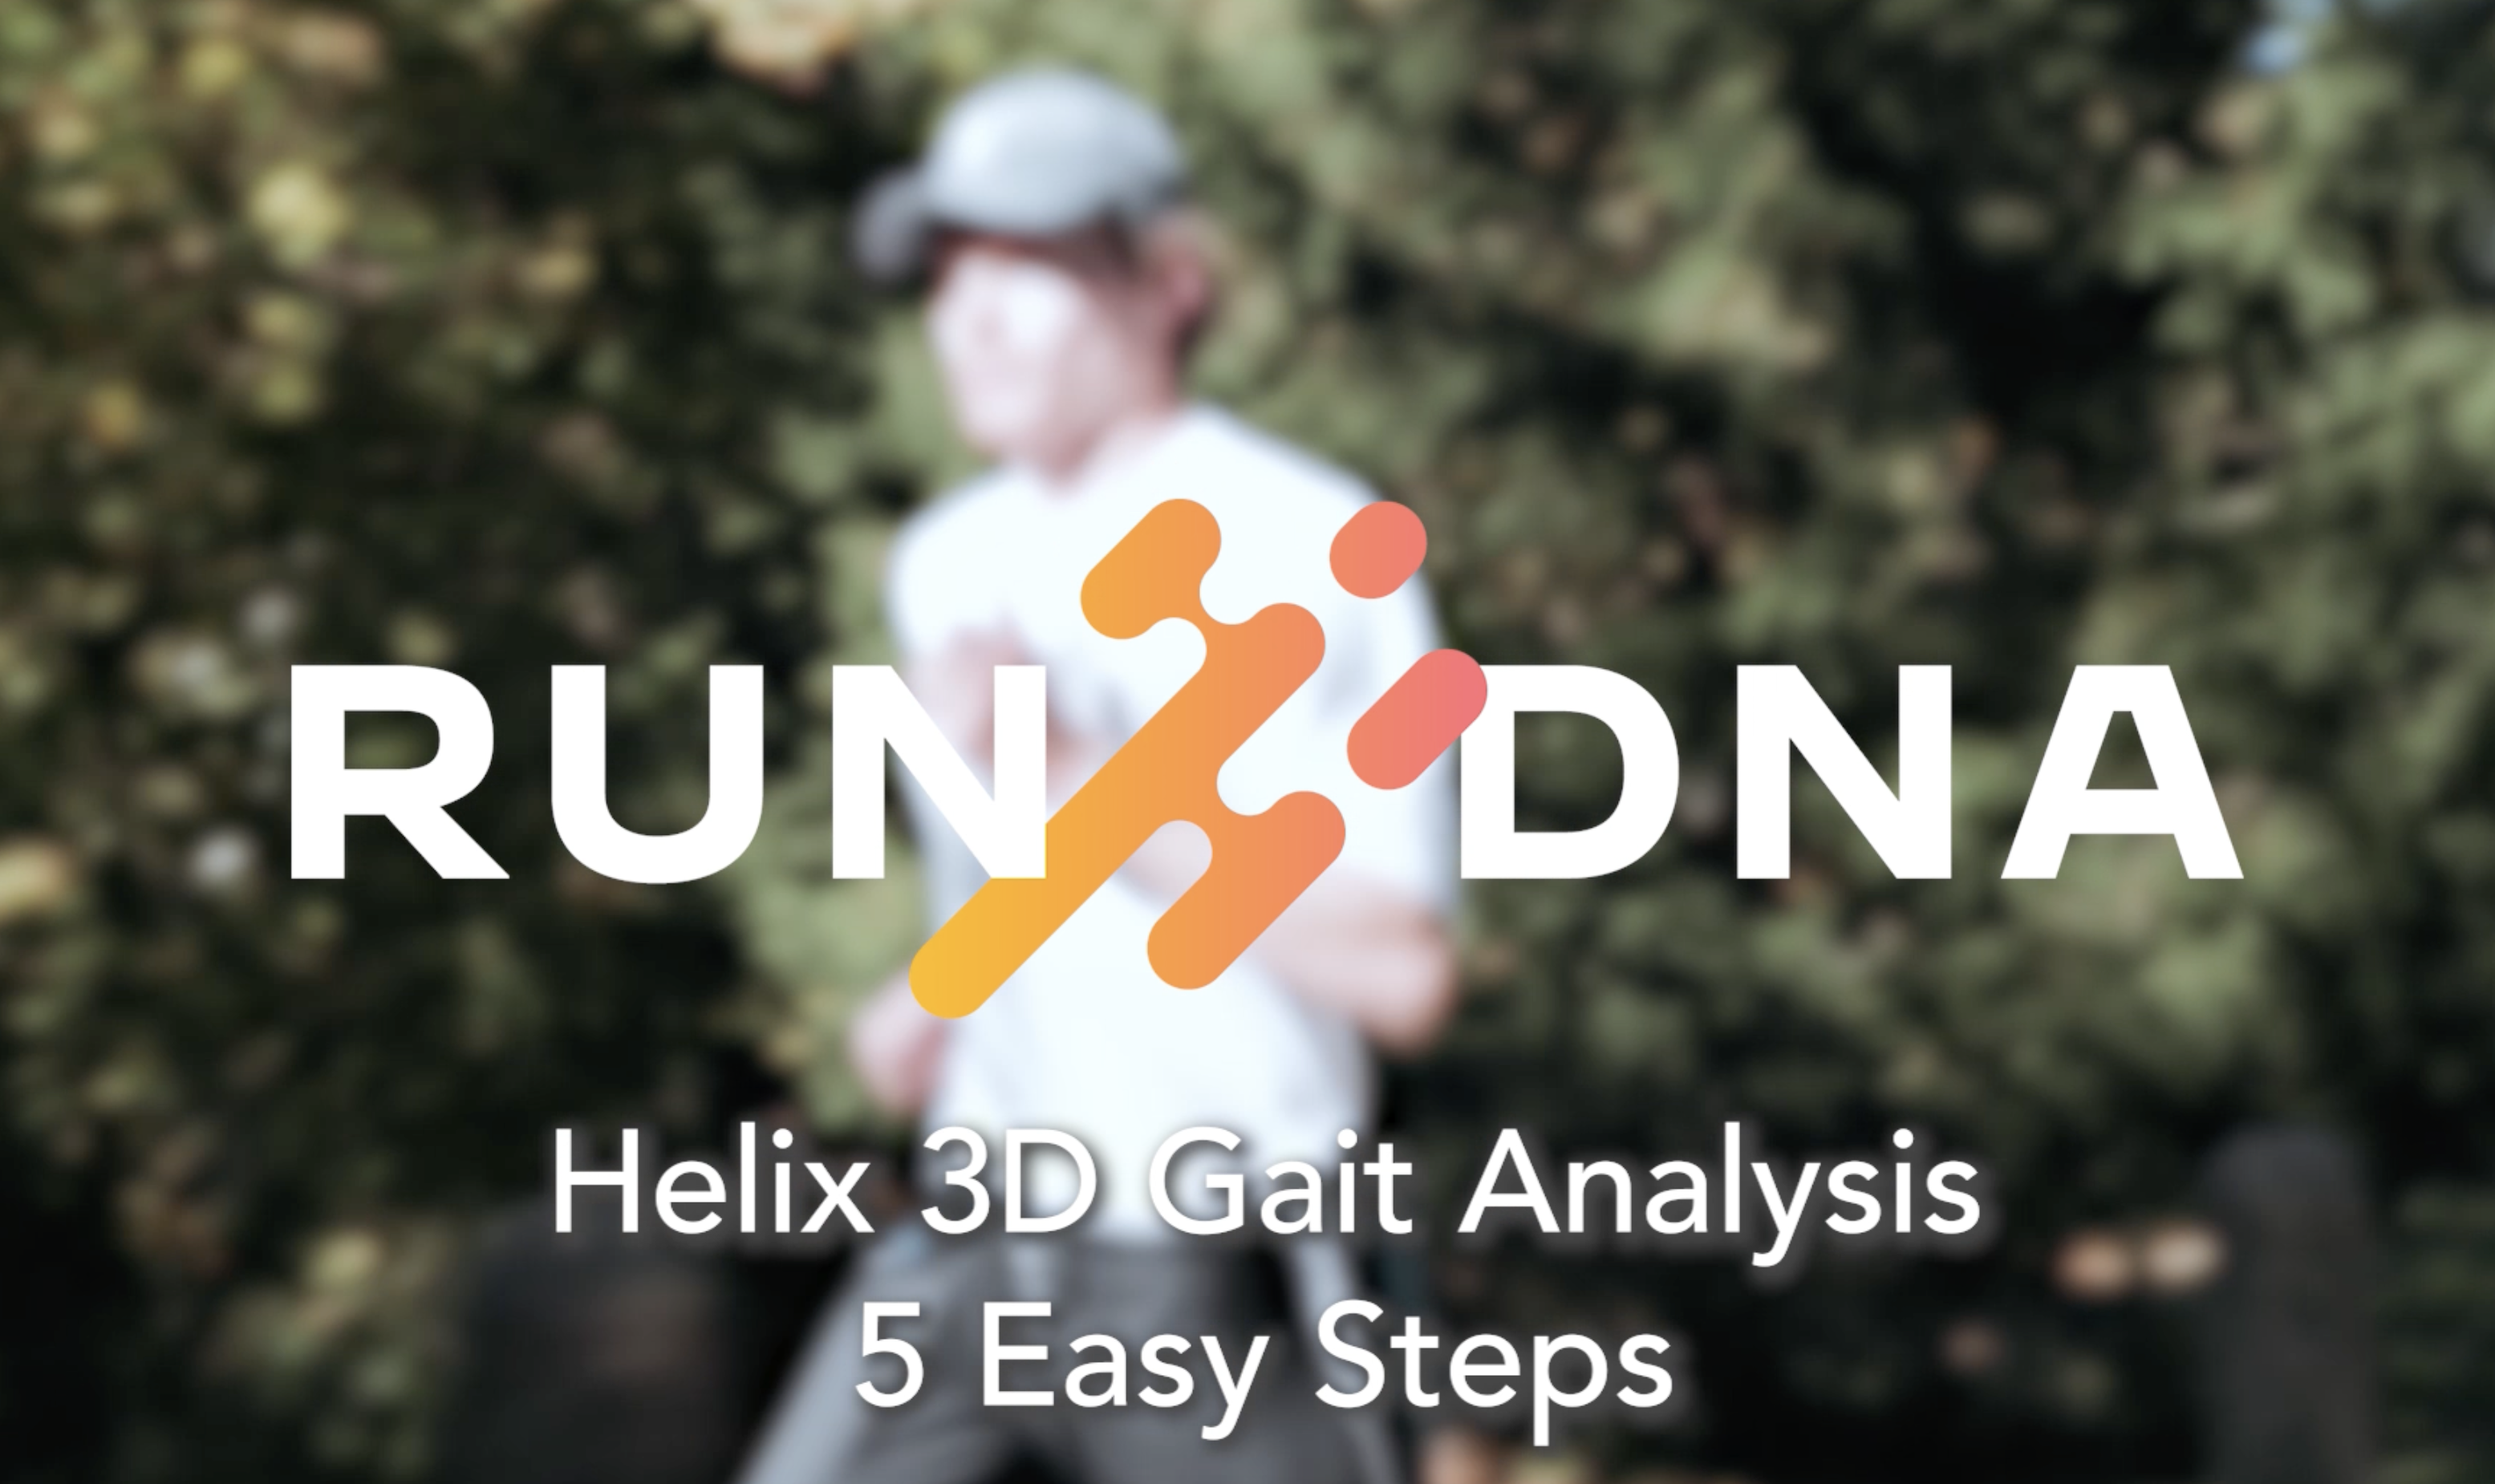 5 Easy Steps to 3D Gait Analysis